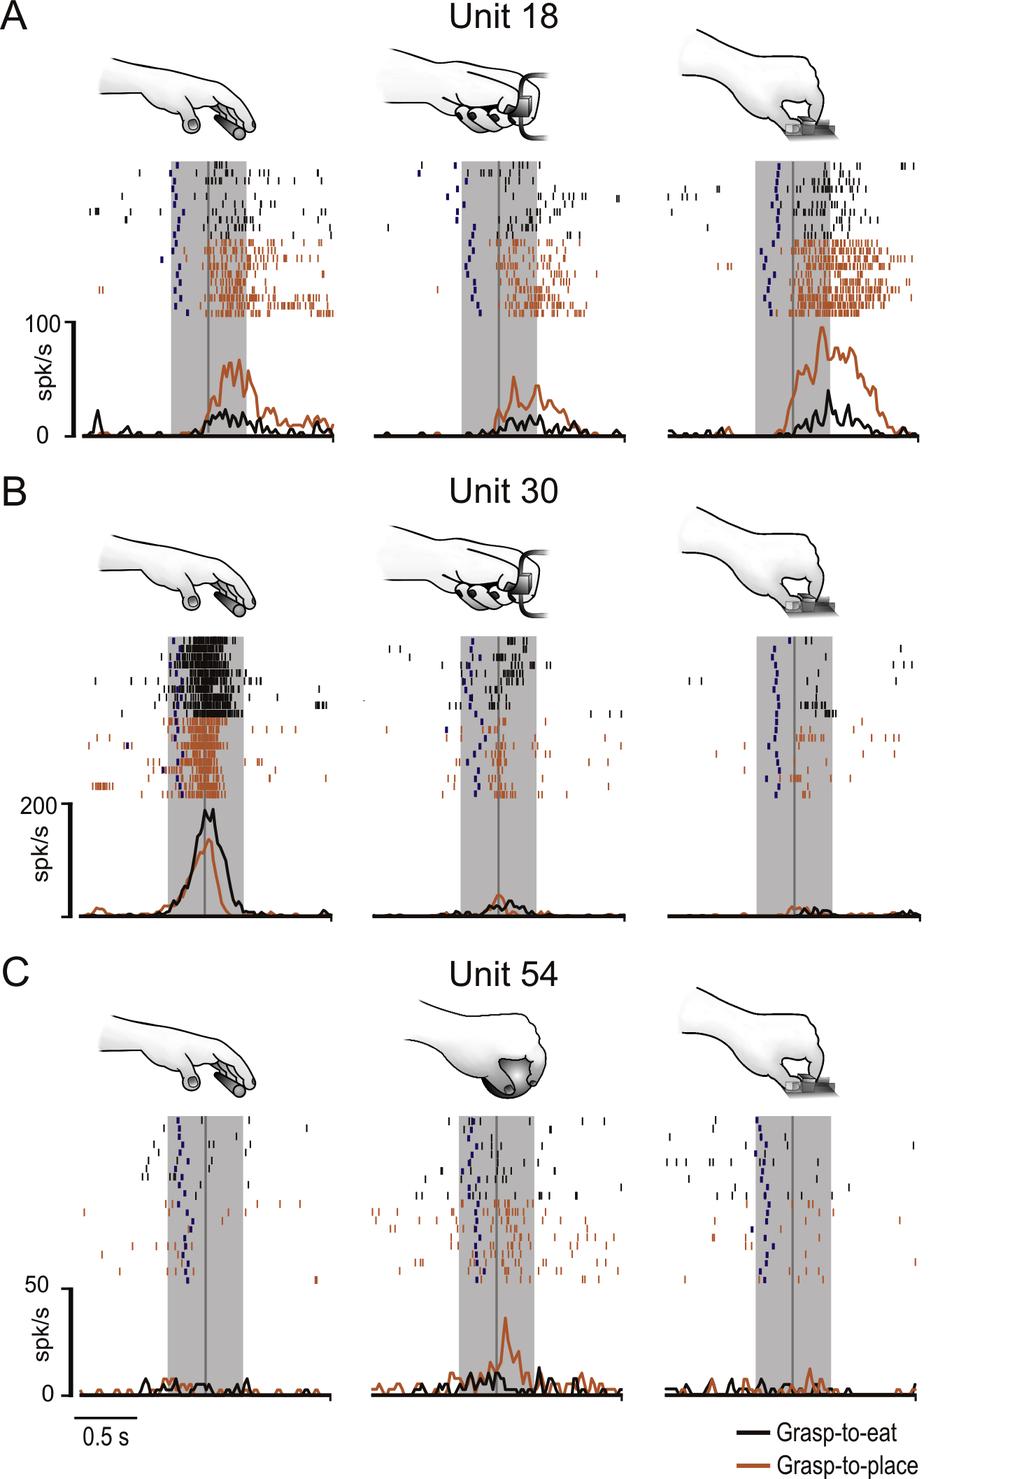 3.3 Neuronal selectivity for grip type and action goal A considerable proportion of the neurons recorded from both area F5